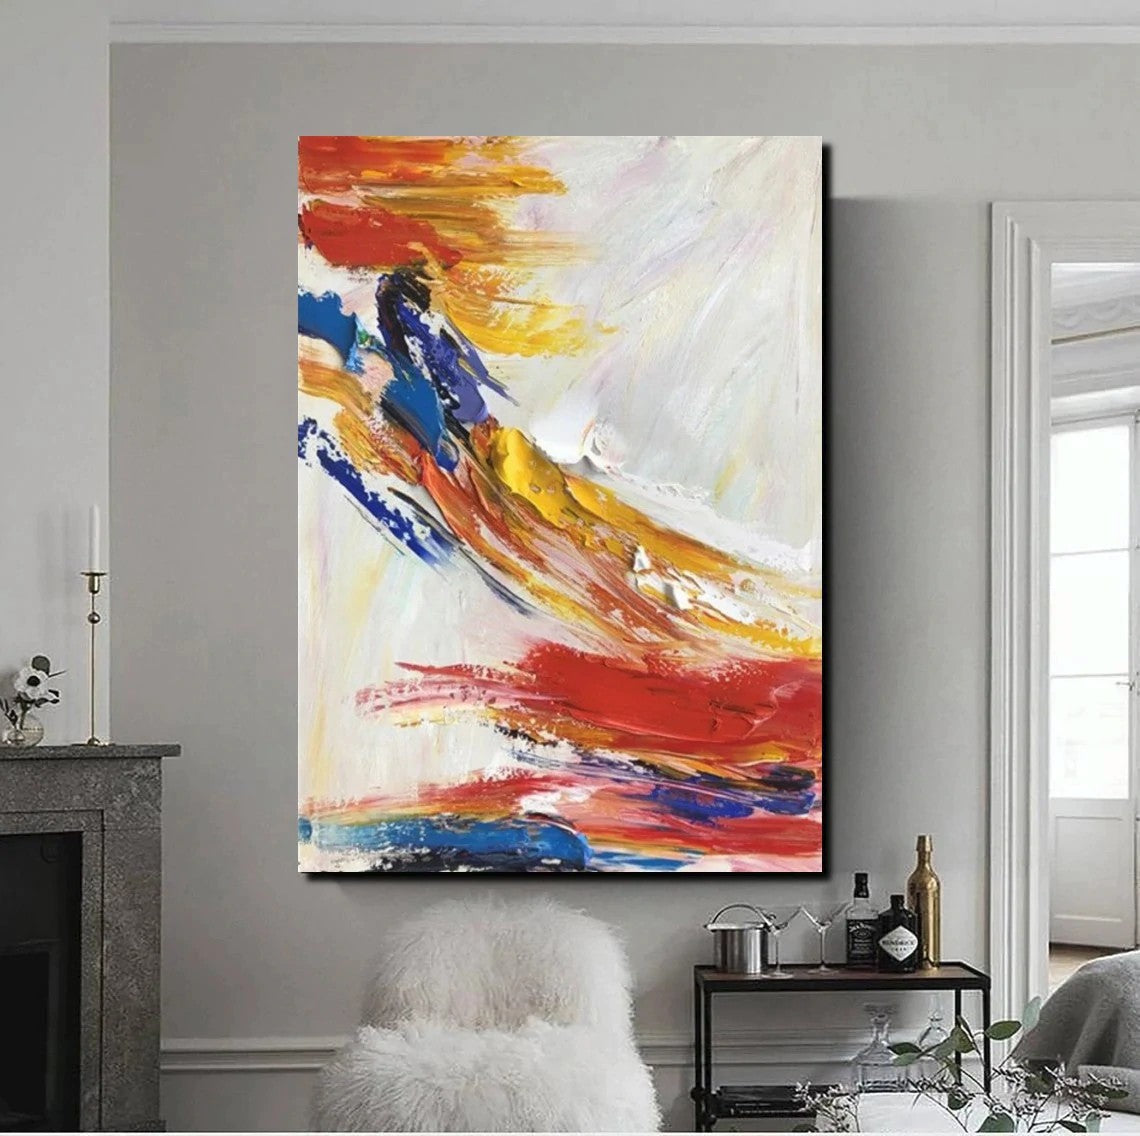 Living Room Wall Art Paintings, Acylic Abstract Paintings Behind Sofa, Large Painting Behind Couch, Buy Abstract Painting Online, Simple Modern Art